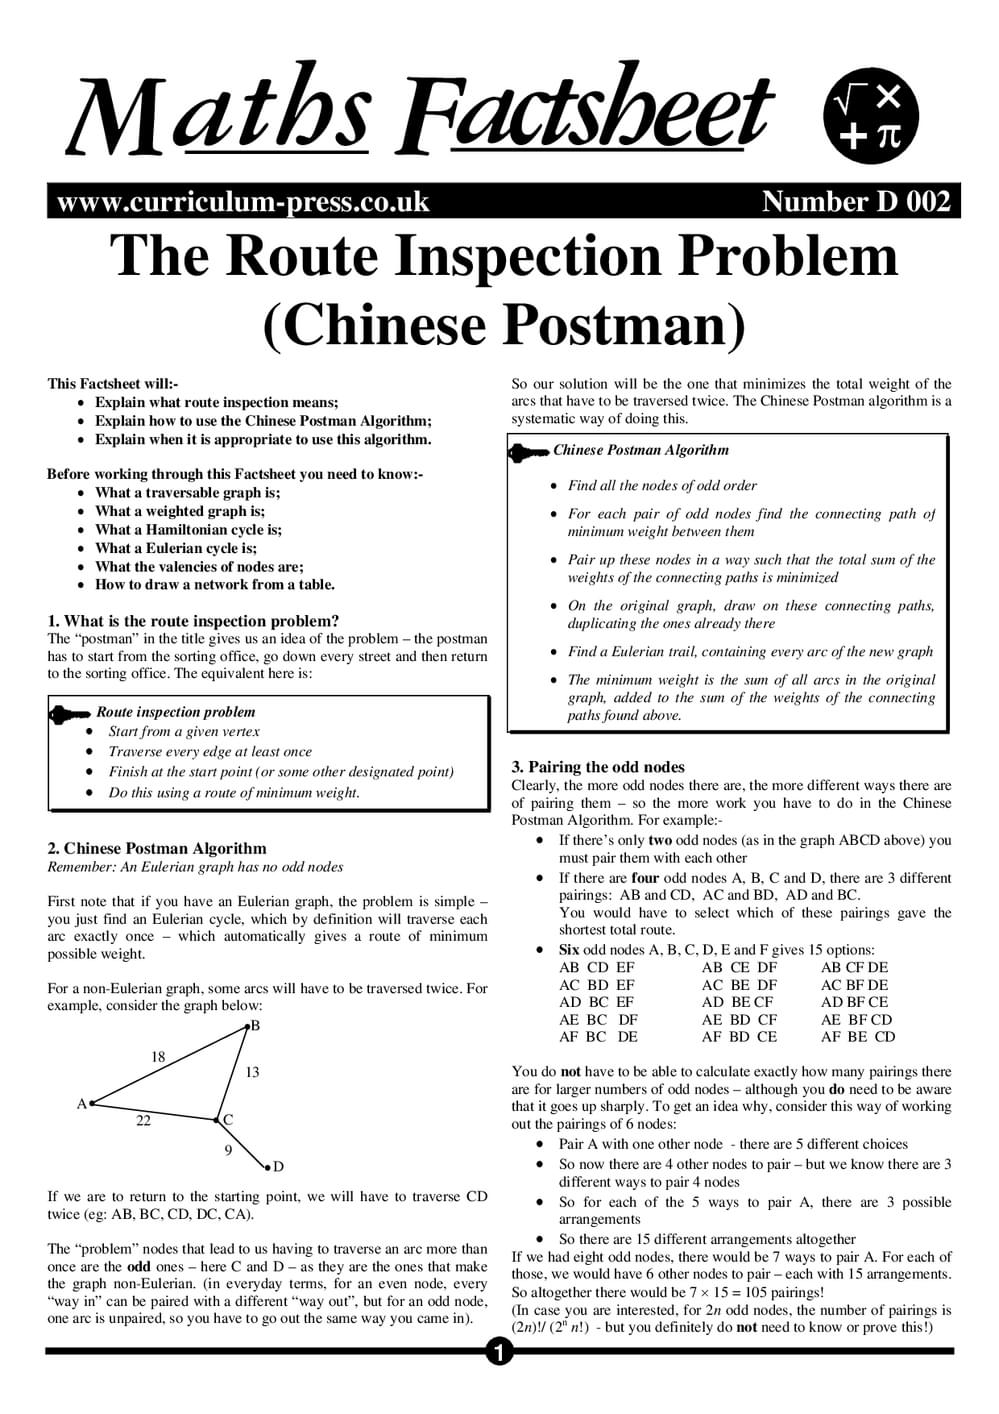 D02 The Route Inspection Problem (Chinese Postman)Rec